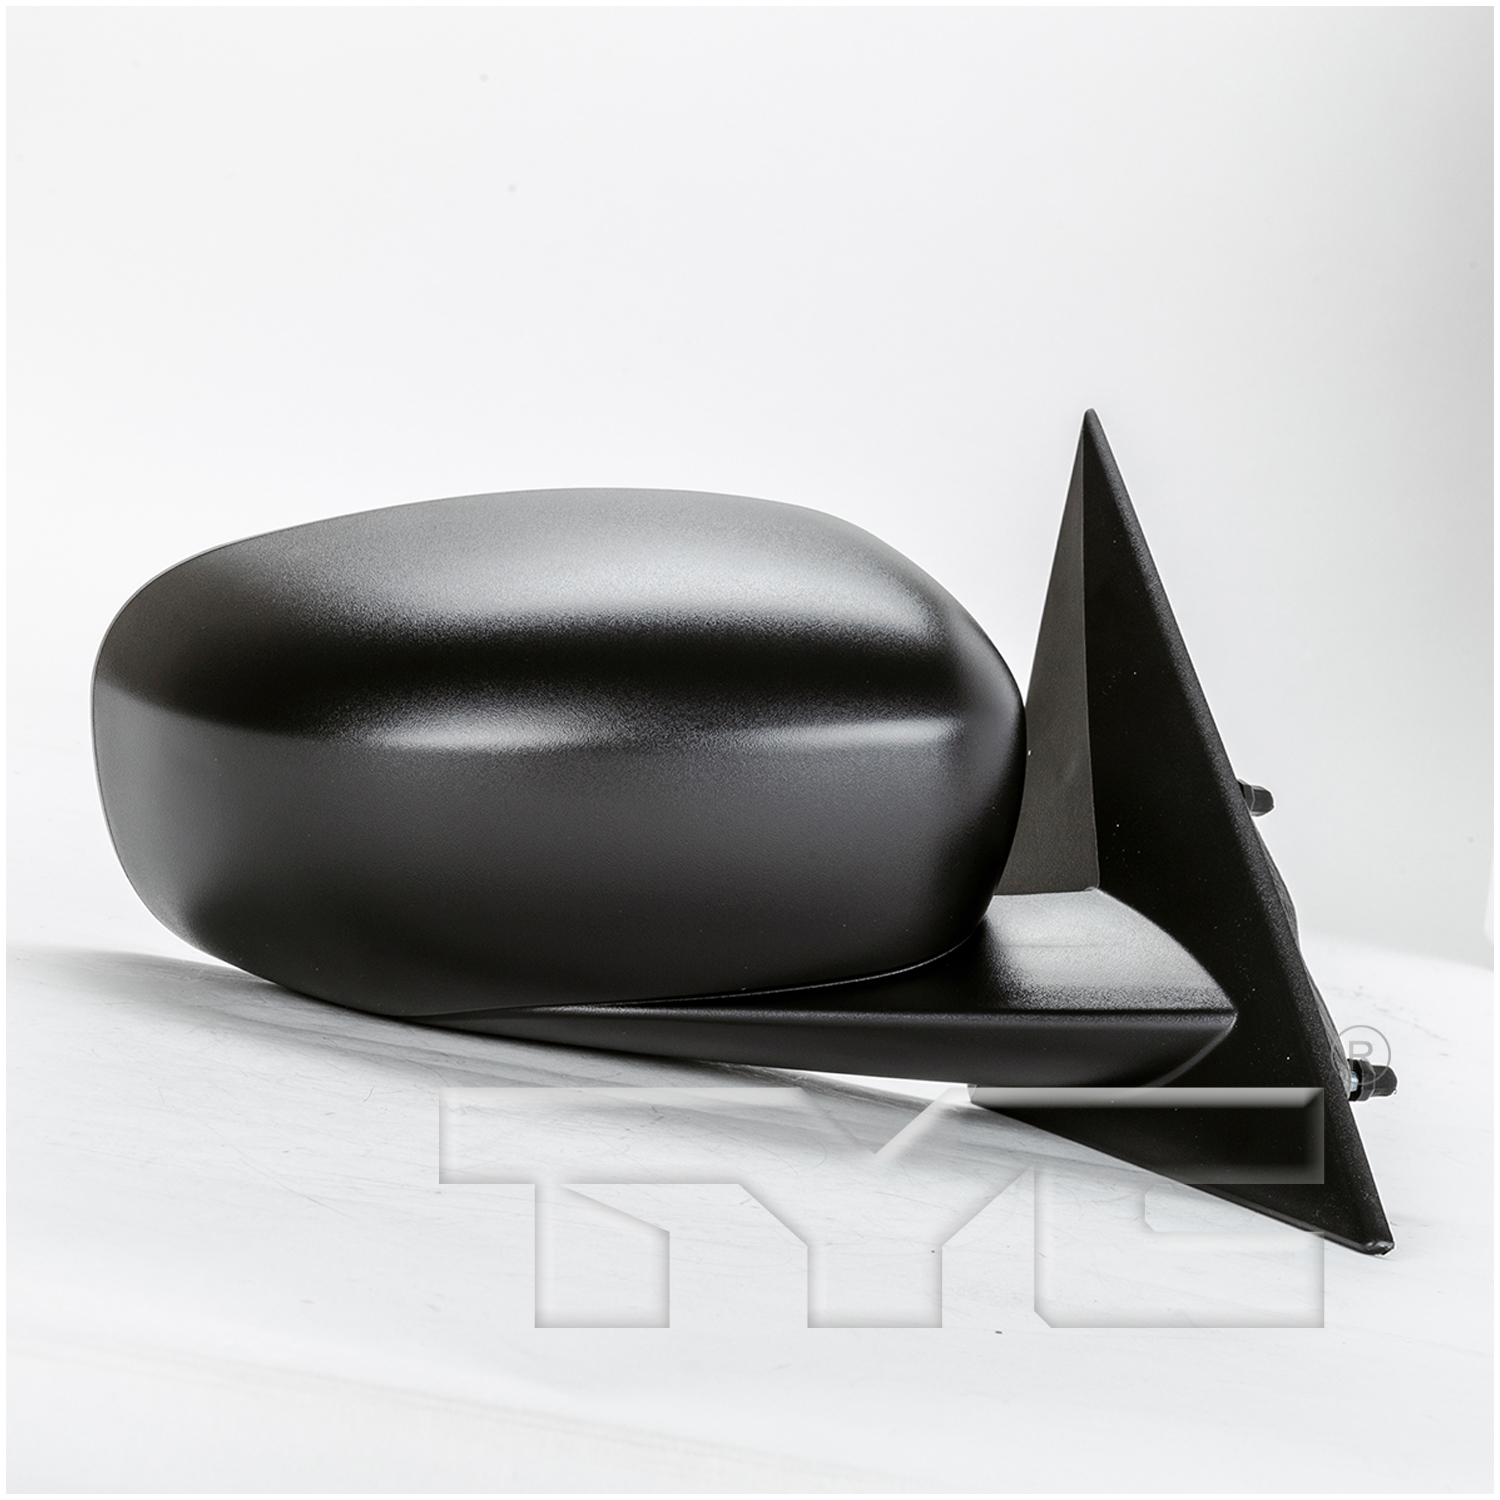 Aftermarket MIRRORS for CHRYSLER - 300, 300,07-10,RT Mirror outside rear view